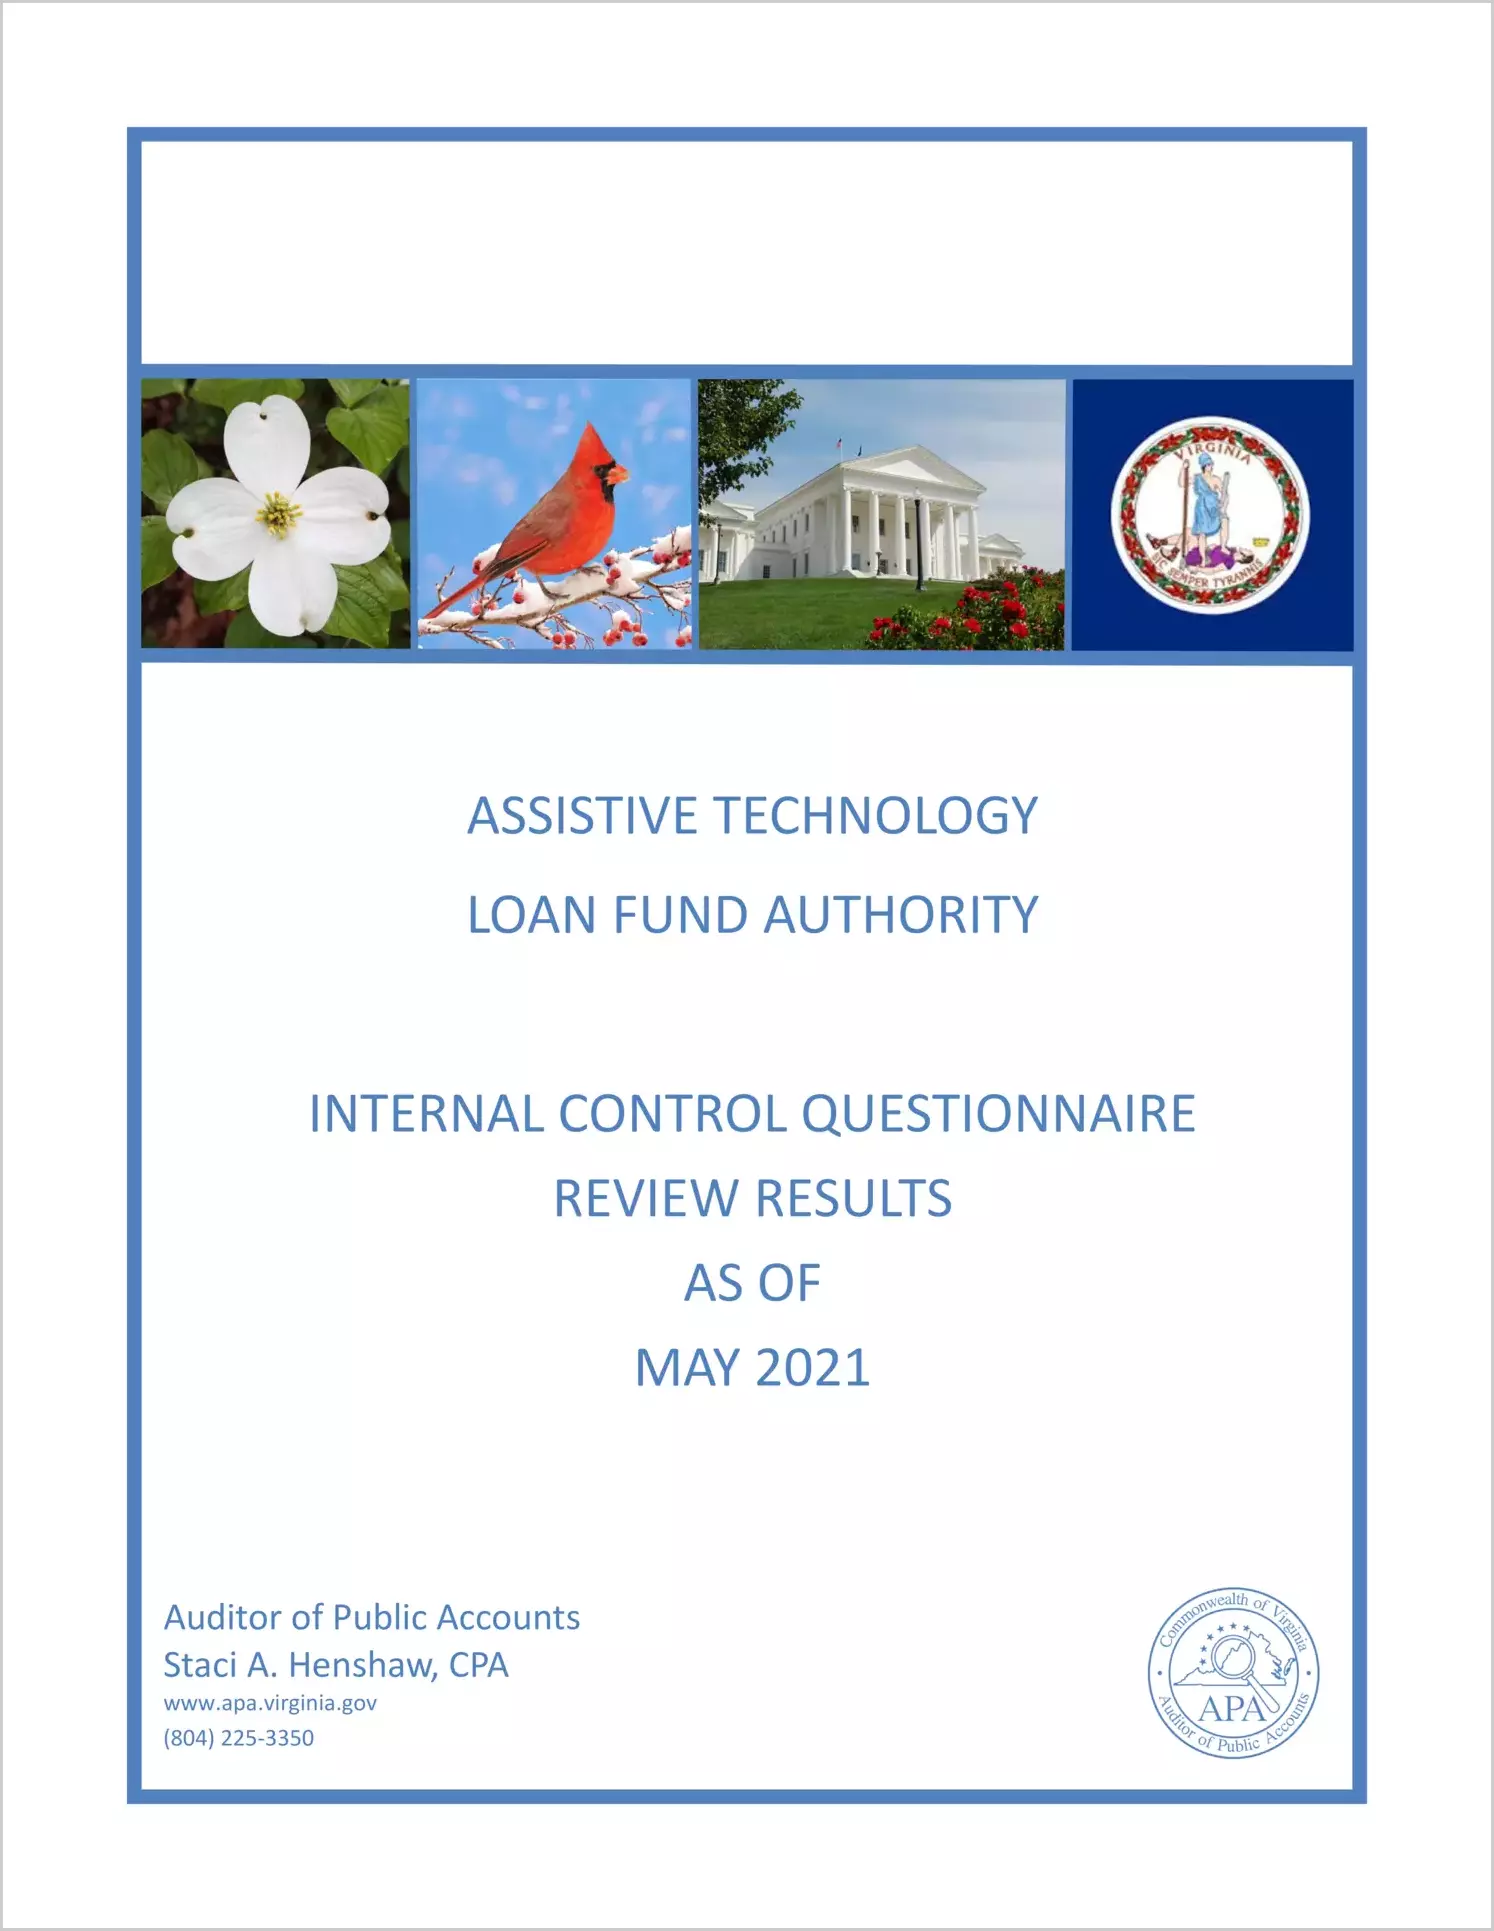 Assistive Technology Loan Fund Authority Internal Control Questionnaire Review as of May 2021